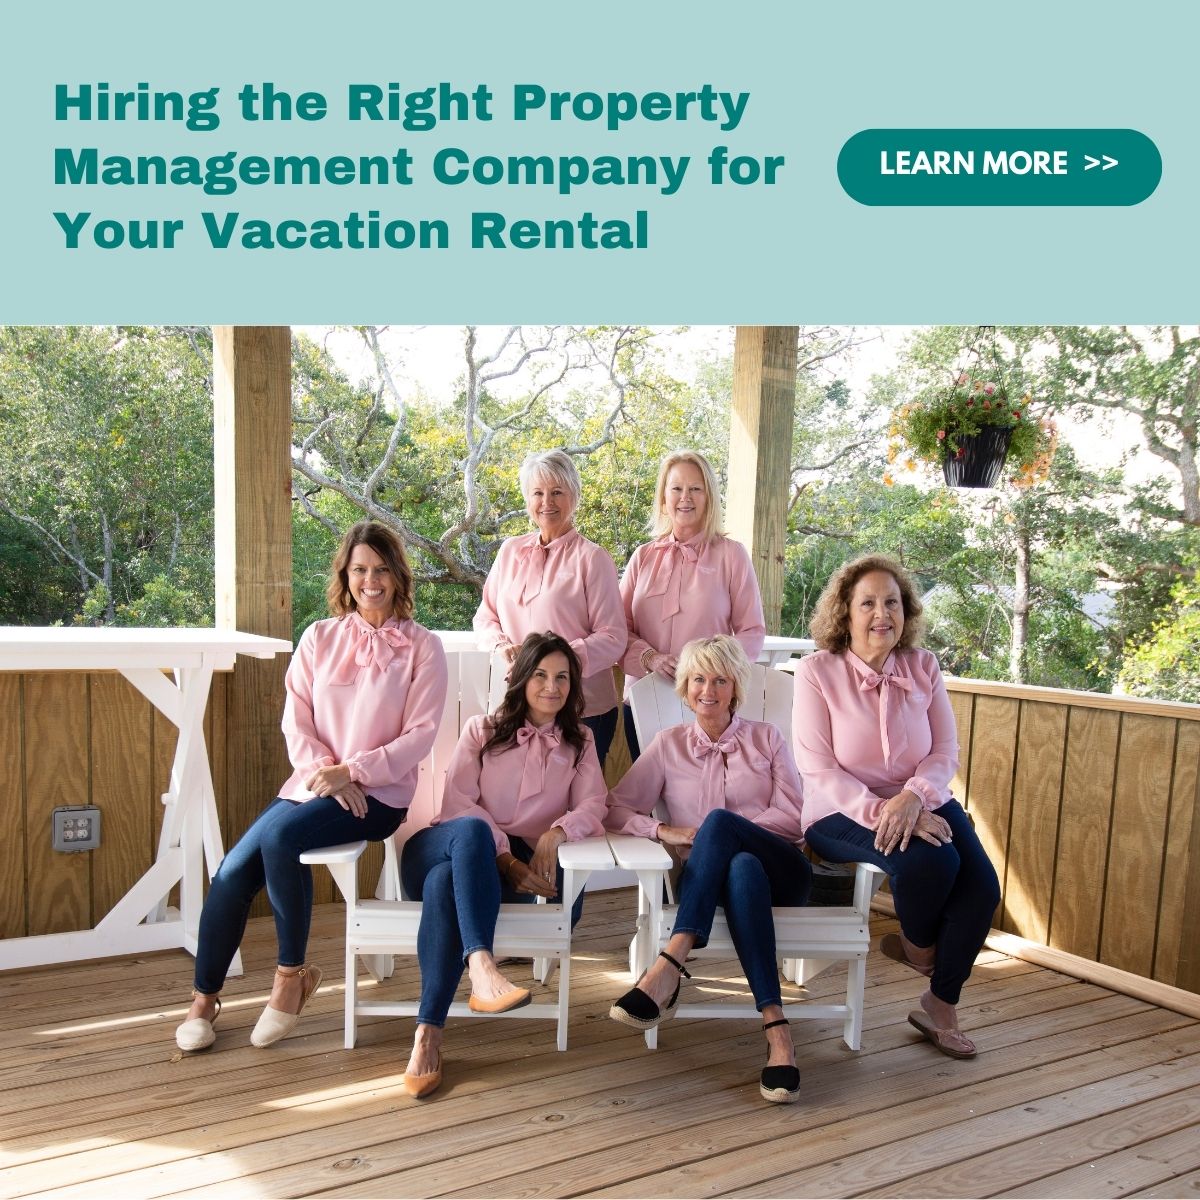 Hiring the Right Property Management Company for Your Vacation Rental